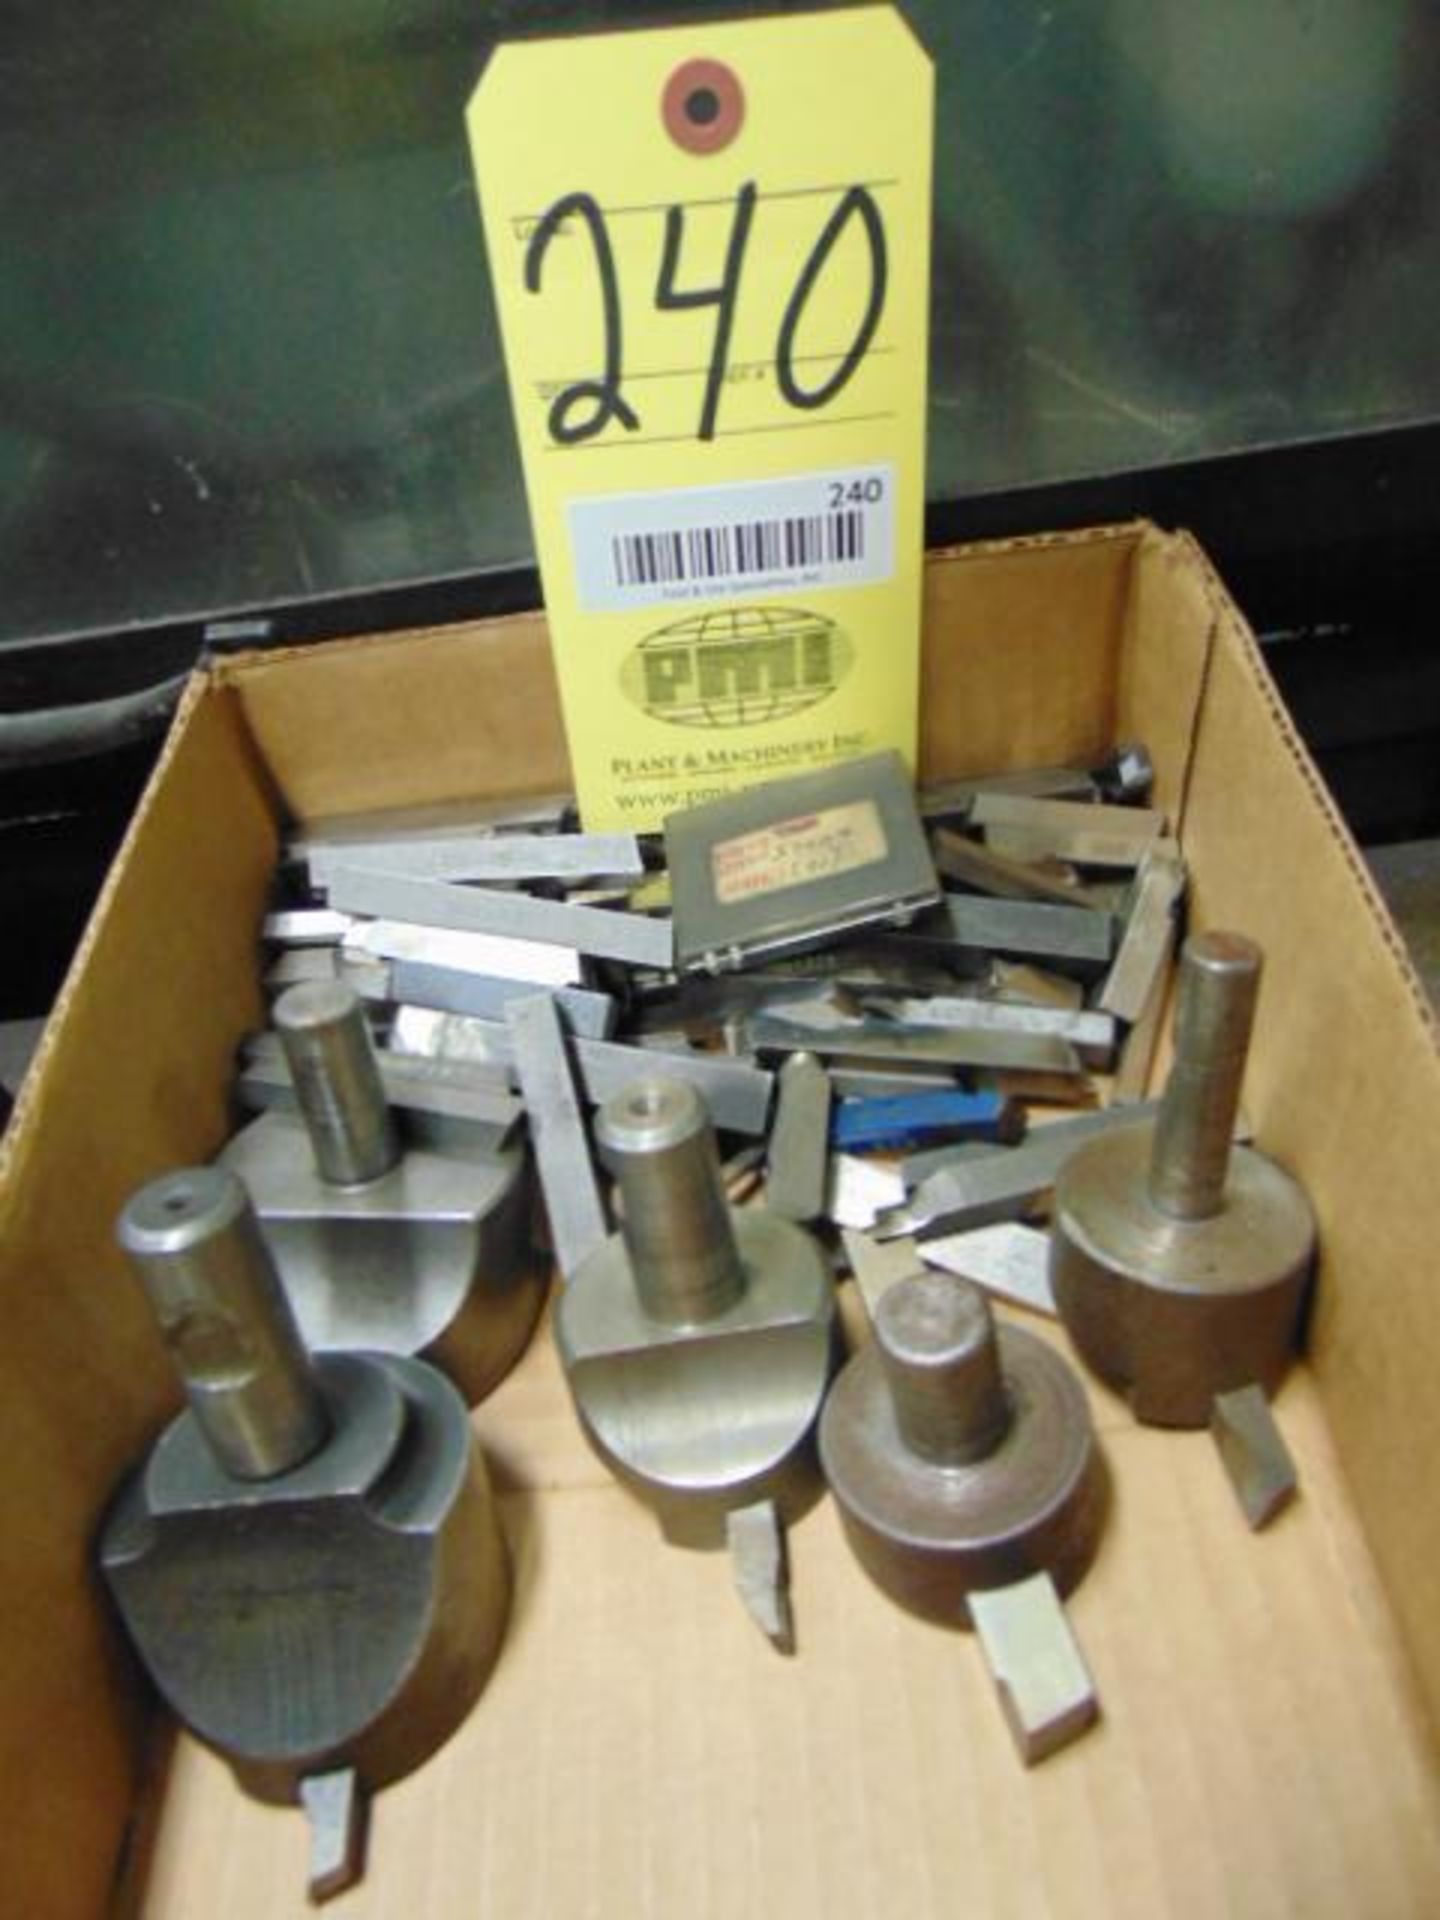 LOT OF FLY CUTTERS, assorted (in one box)